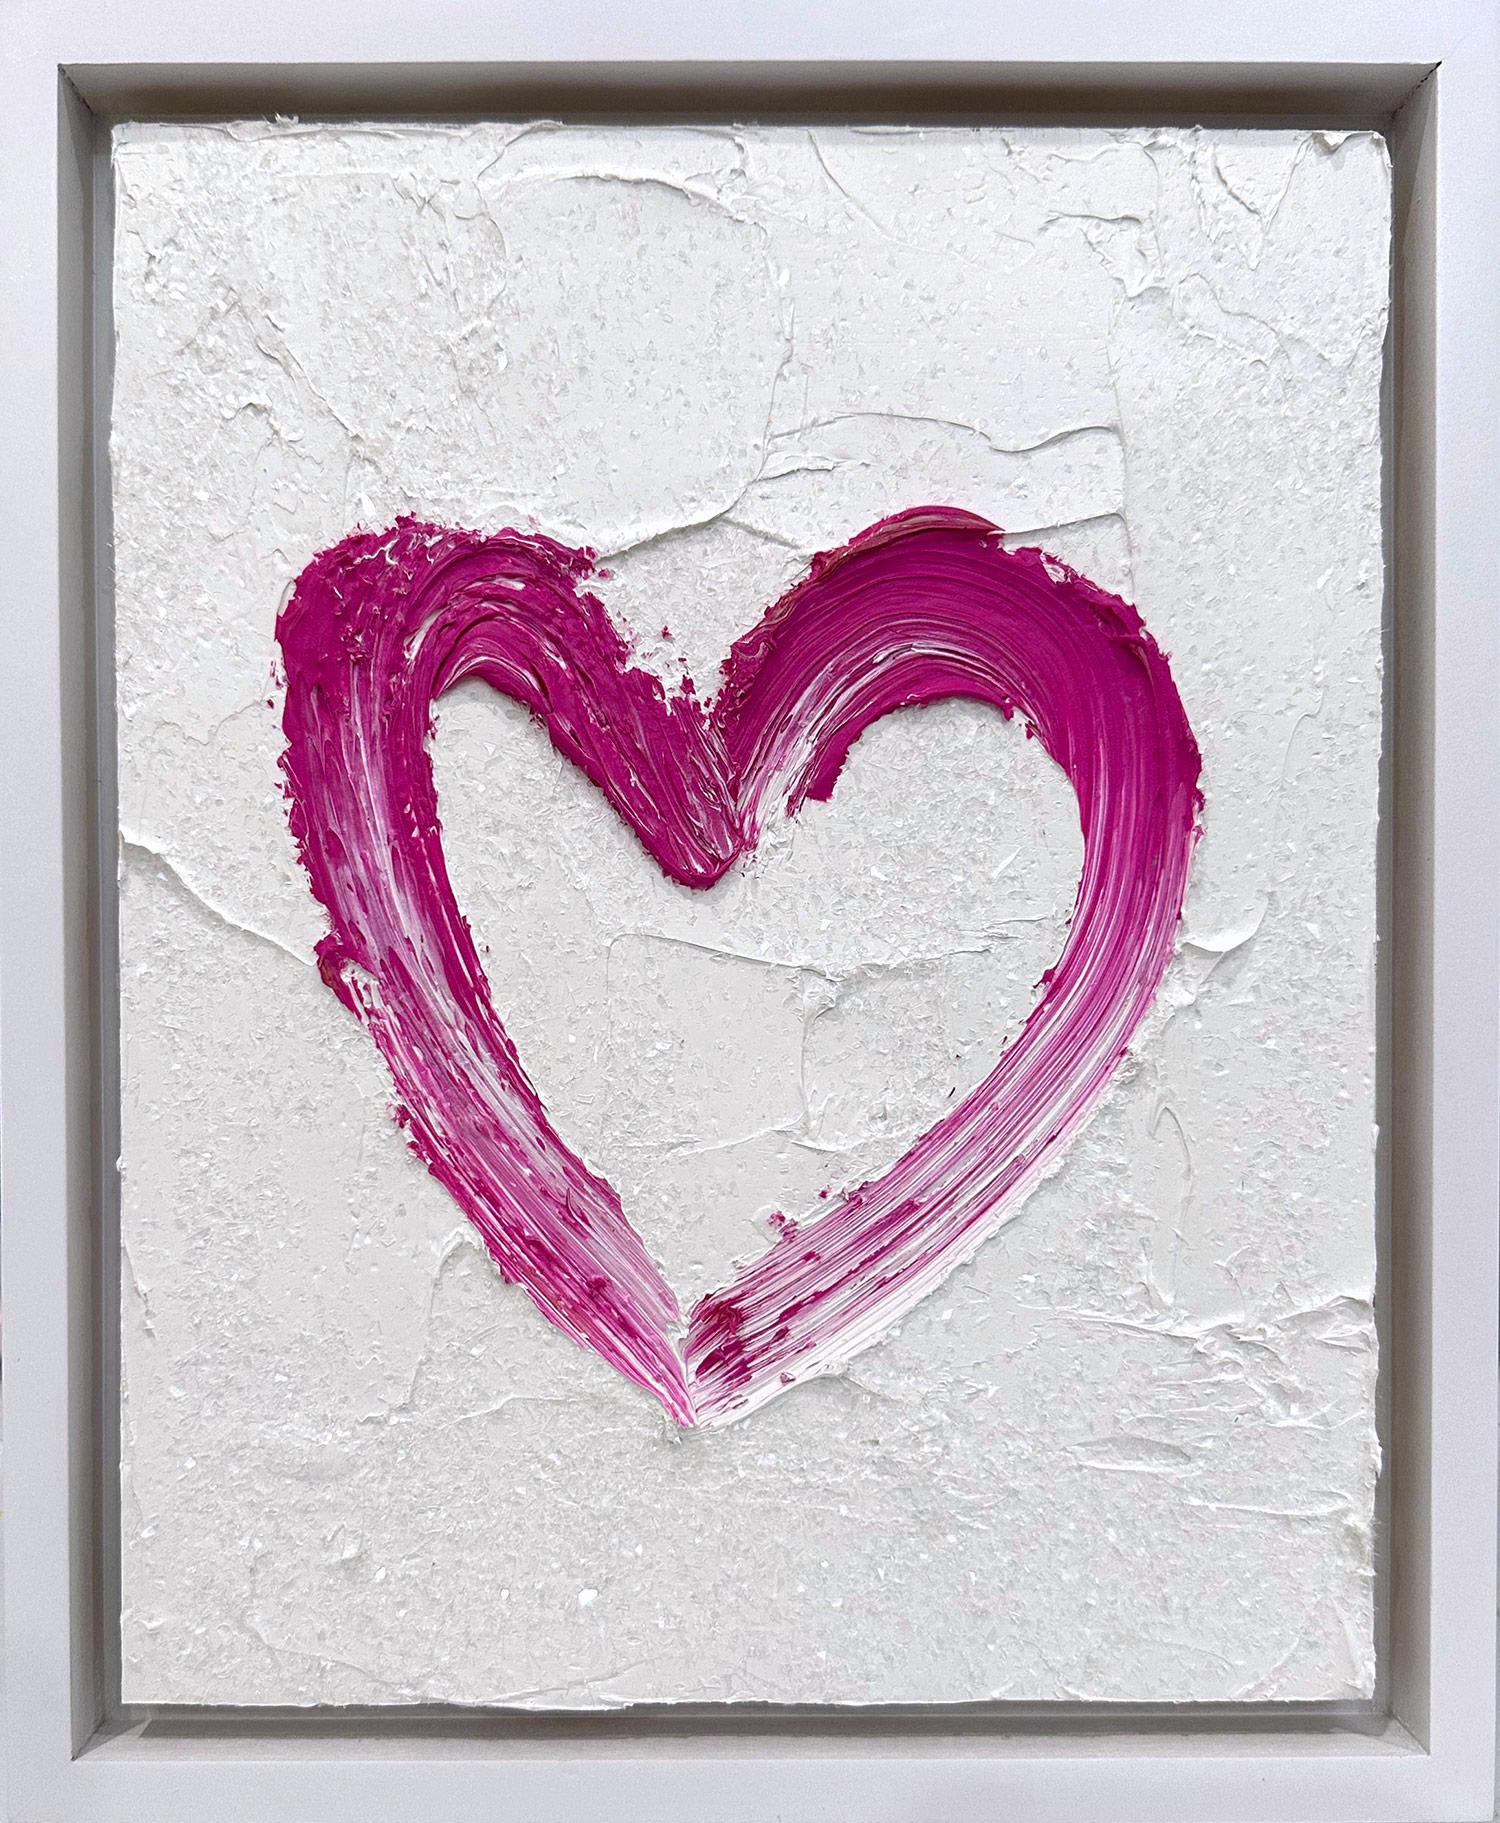 Cindy Shaoul Abstract Painting - "My Sweet Heart" Pink and White Pop Art Oil Painting with White Floater Frame